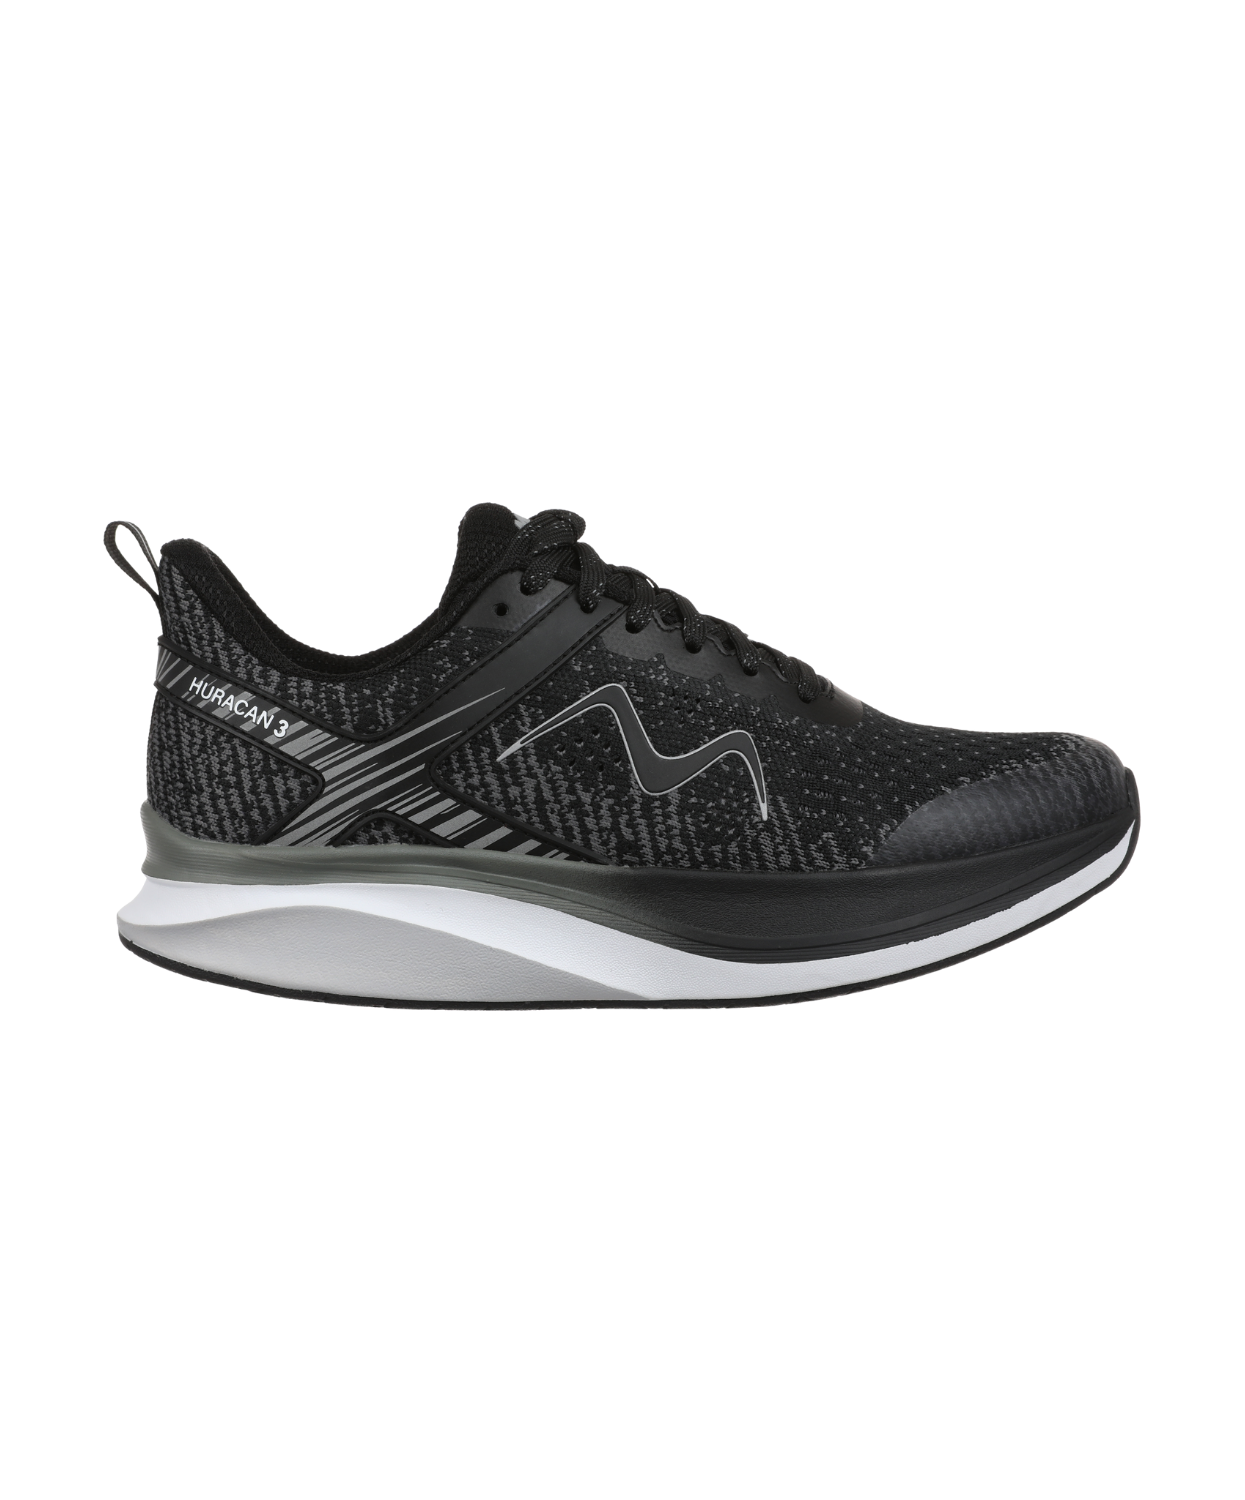 MBT Huracan 3 Lace Up Black Womens Sneakers